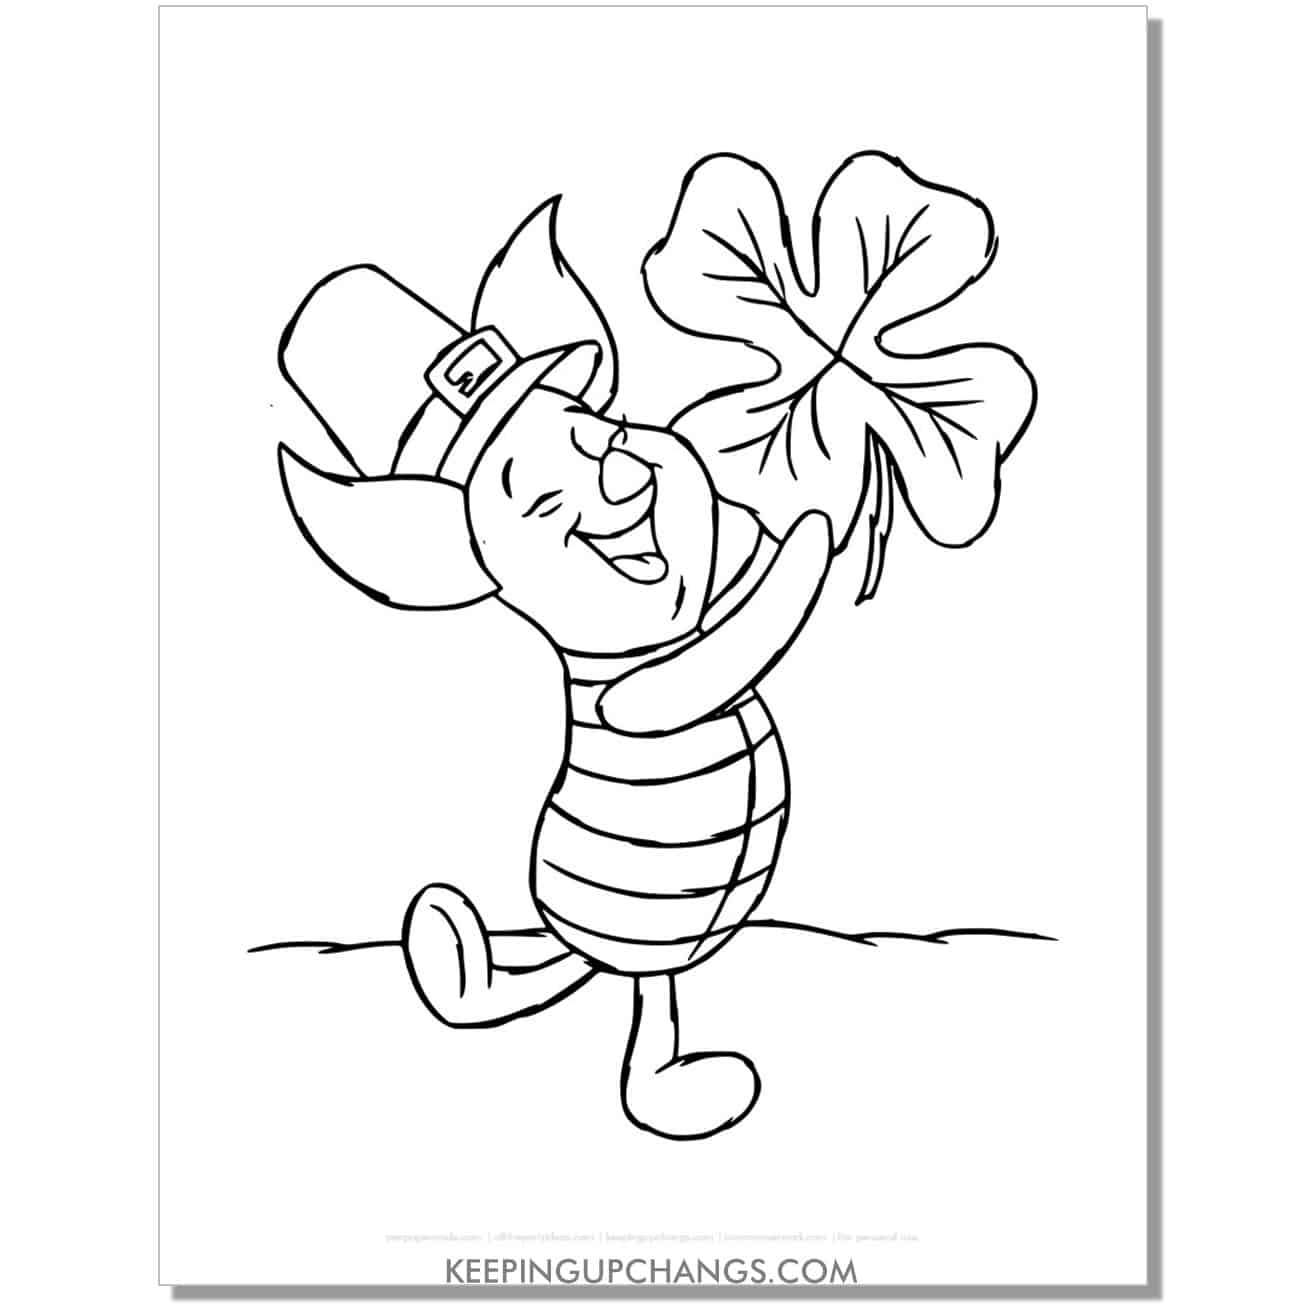 piglet with leprechaun hat and four leaf clover coloring page, sheet.